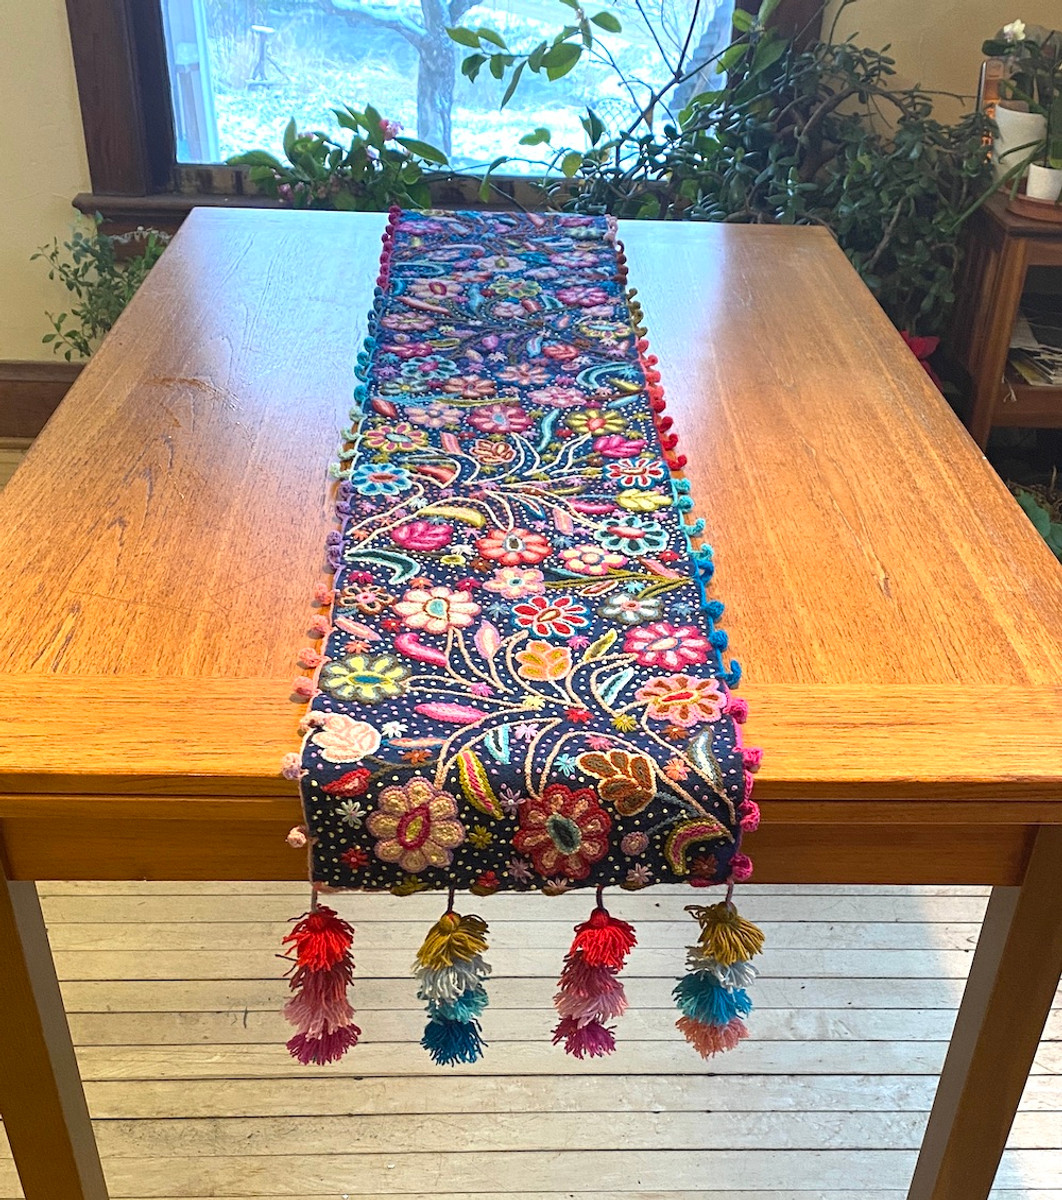 Handwoven Hand Embroidered Wool Table Runner Navy Blue Peru.  The floral patterns are done using different embroidery and crewel stitches.  Some of the colors: red, pink, turquoise, light blue, yelLow,  olive, lime green, fuchsia, red brown, lavender,, salmon, and more.